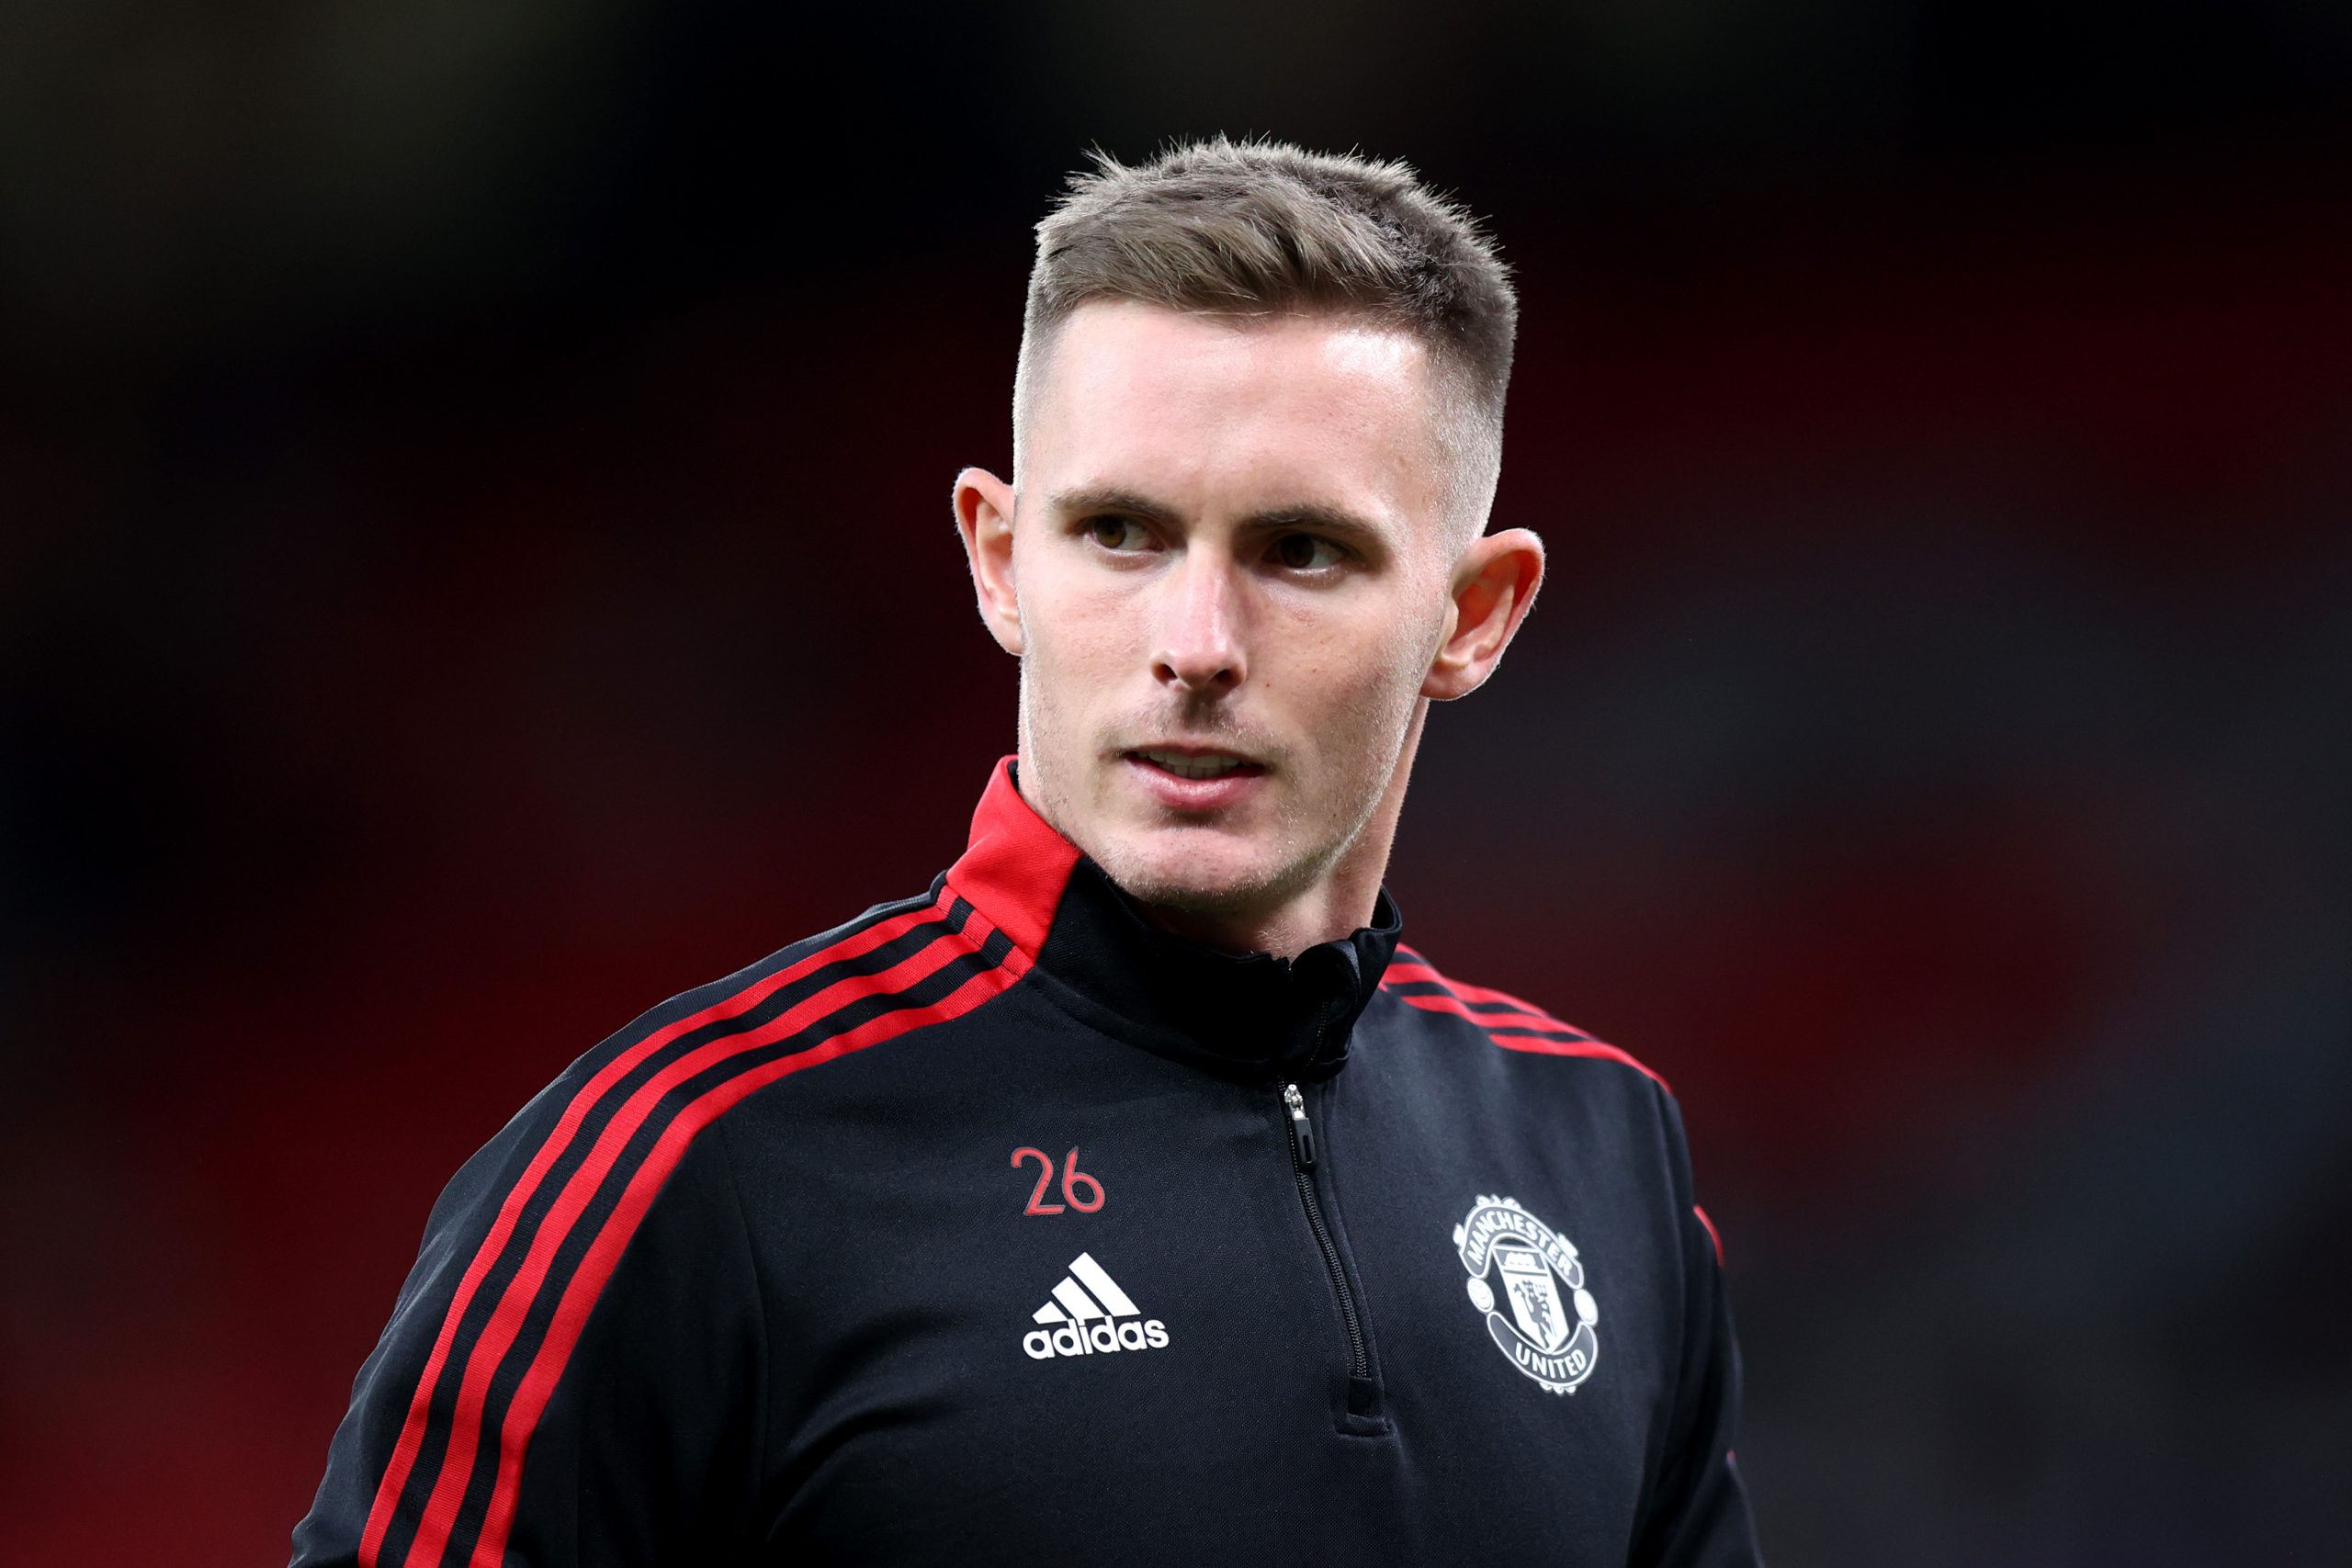 Fabrizio Romano: Manchester United star Dean Henderson will join Nottingham Forest on a loan move.